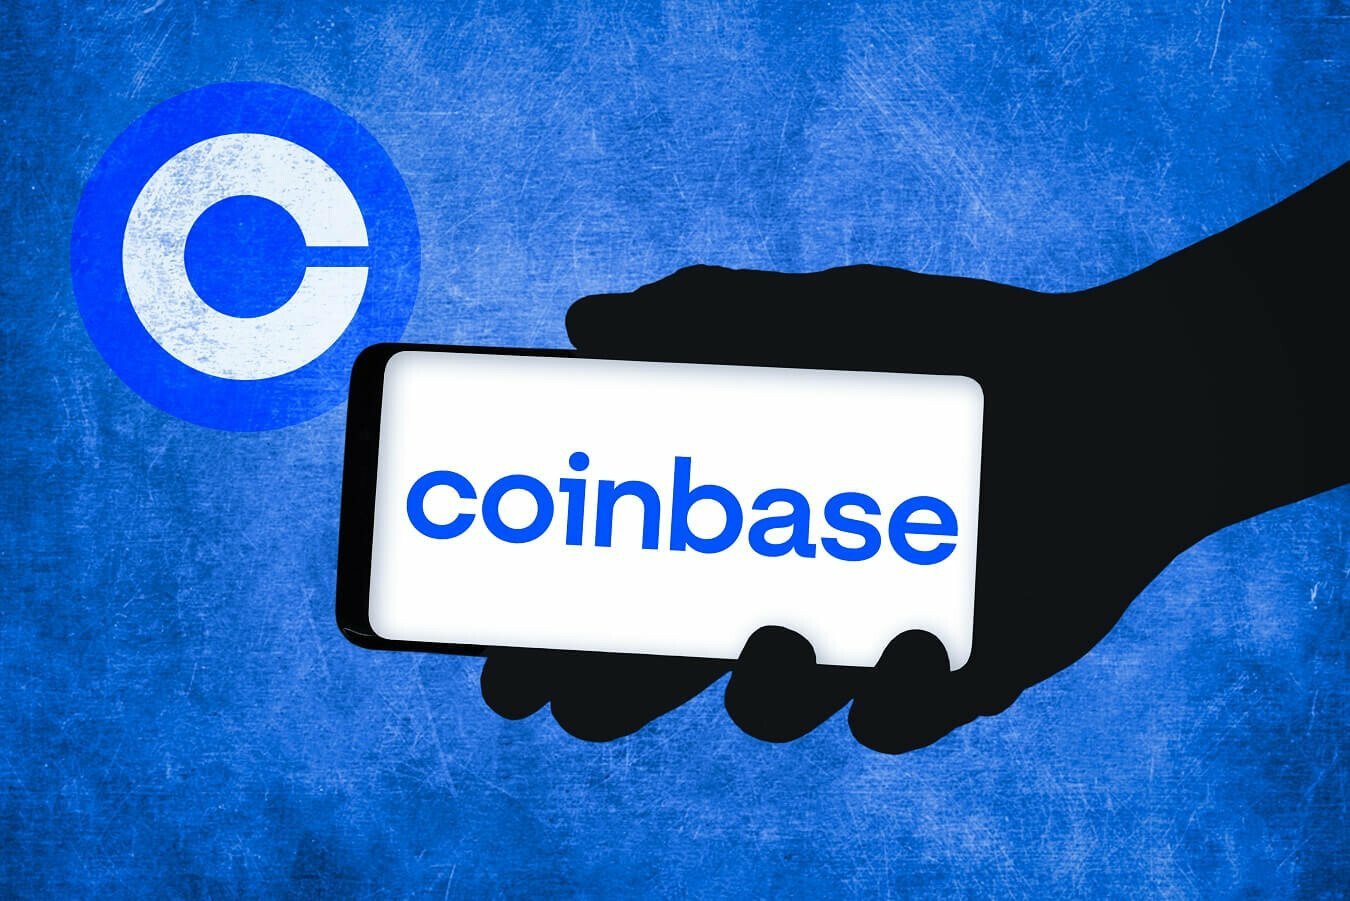 Bank of America Upgrades Coinbase Rating from Underperform to Neutral